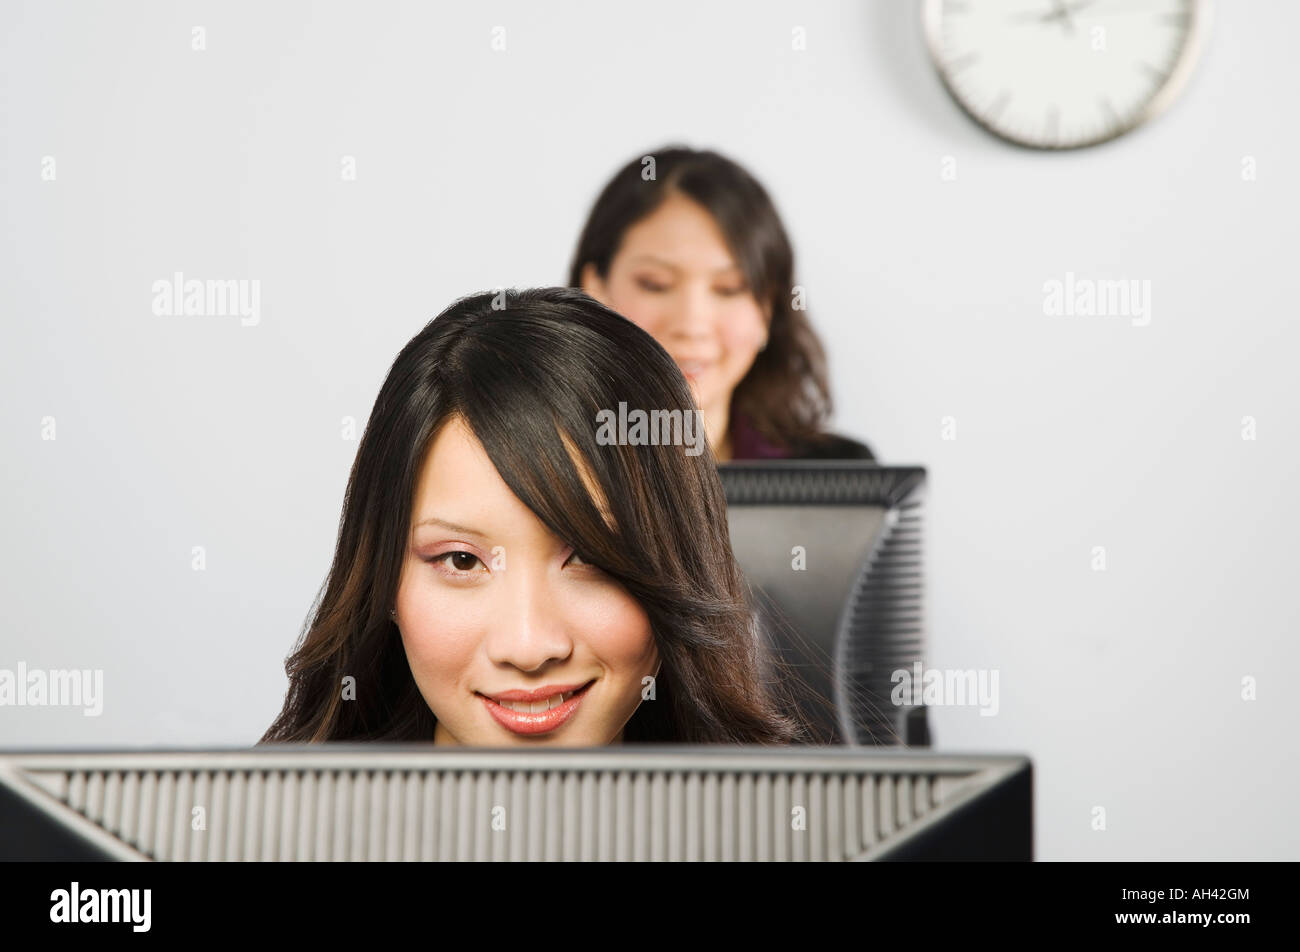 Females in front of monitors Stock Photo